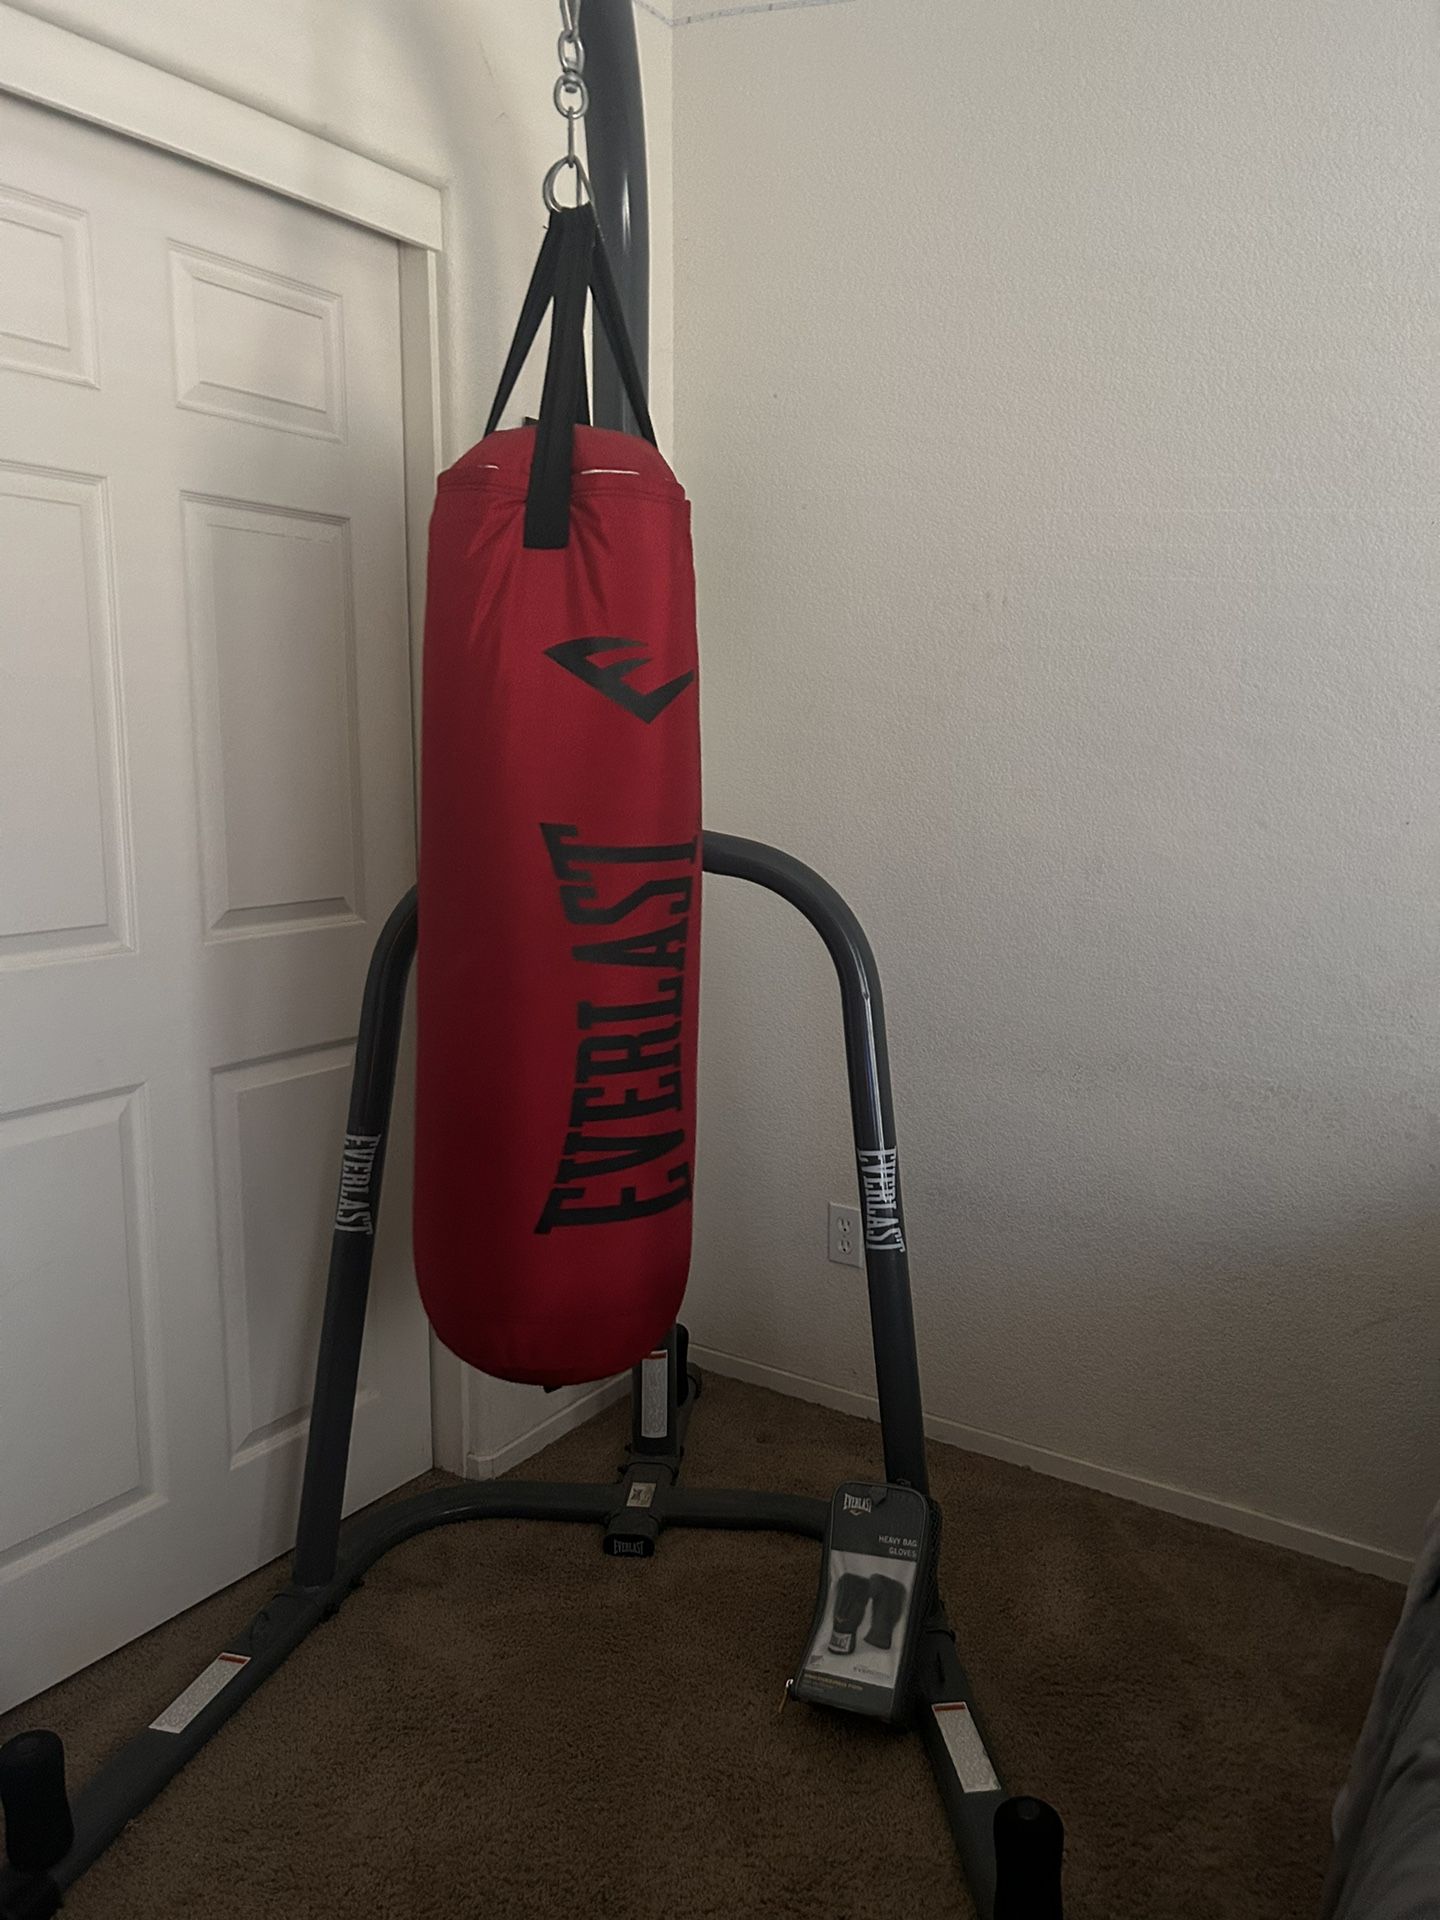 Everlast Heavy bag And Stand 